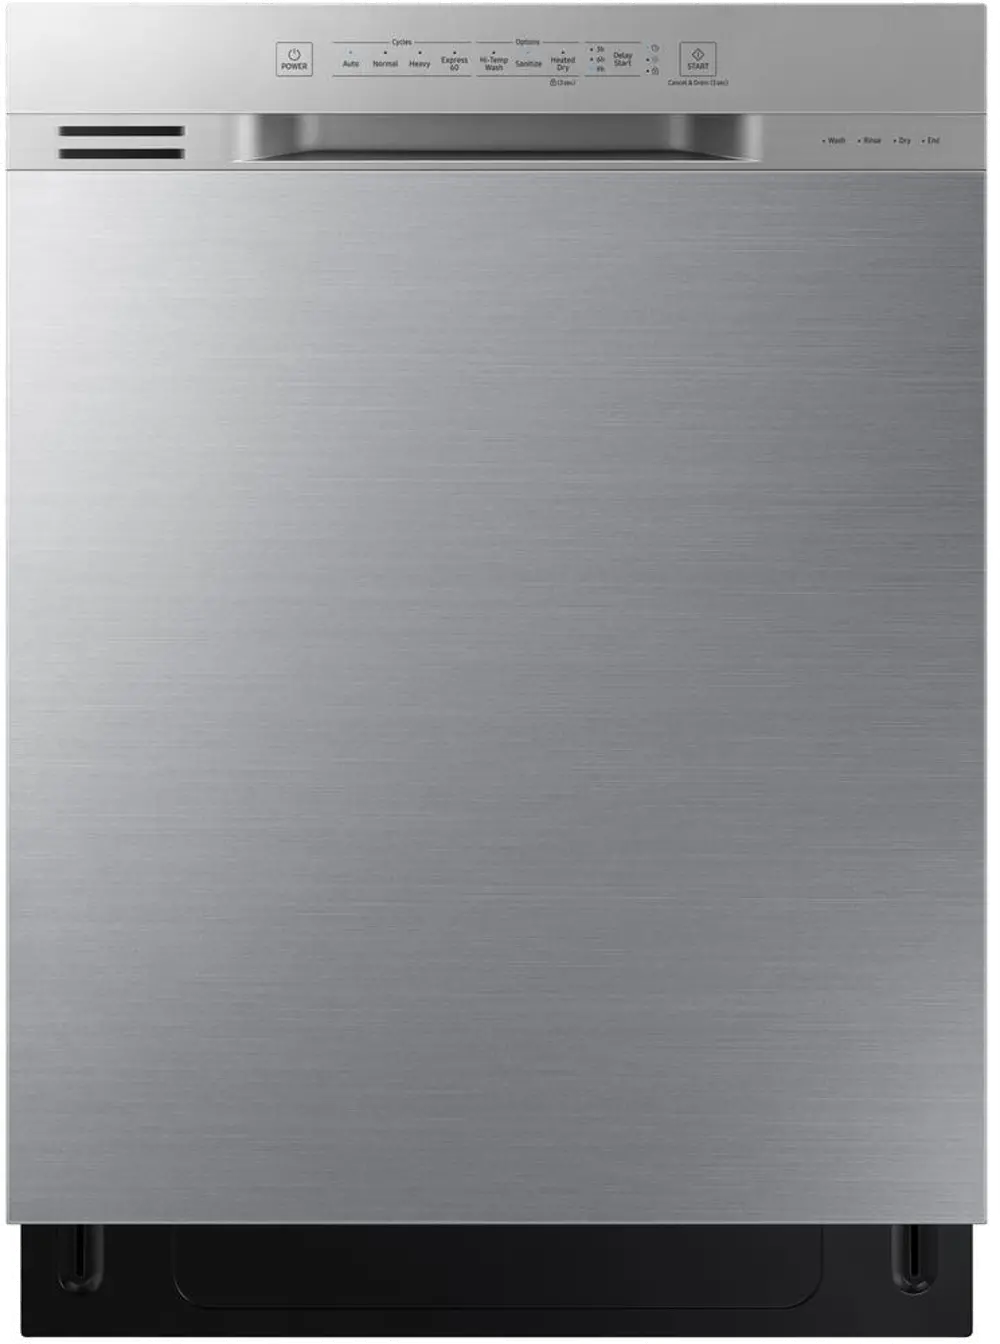 DW80N3030US Samsung Front Control Dishwasher - Stainless Steel-1